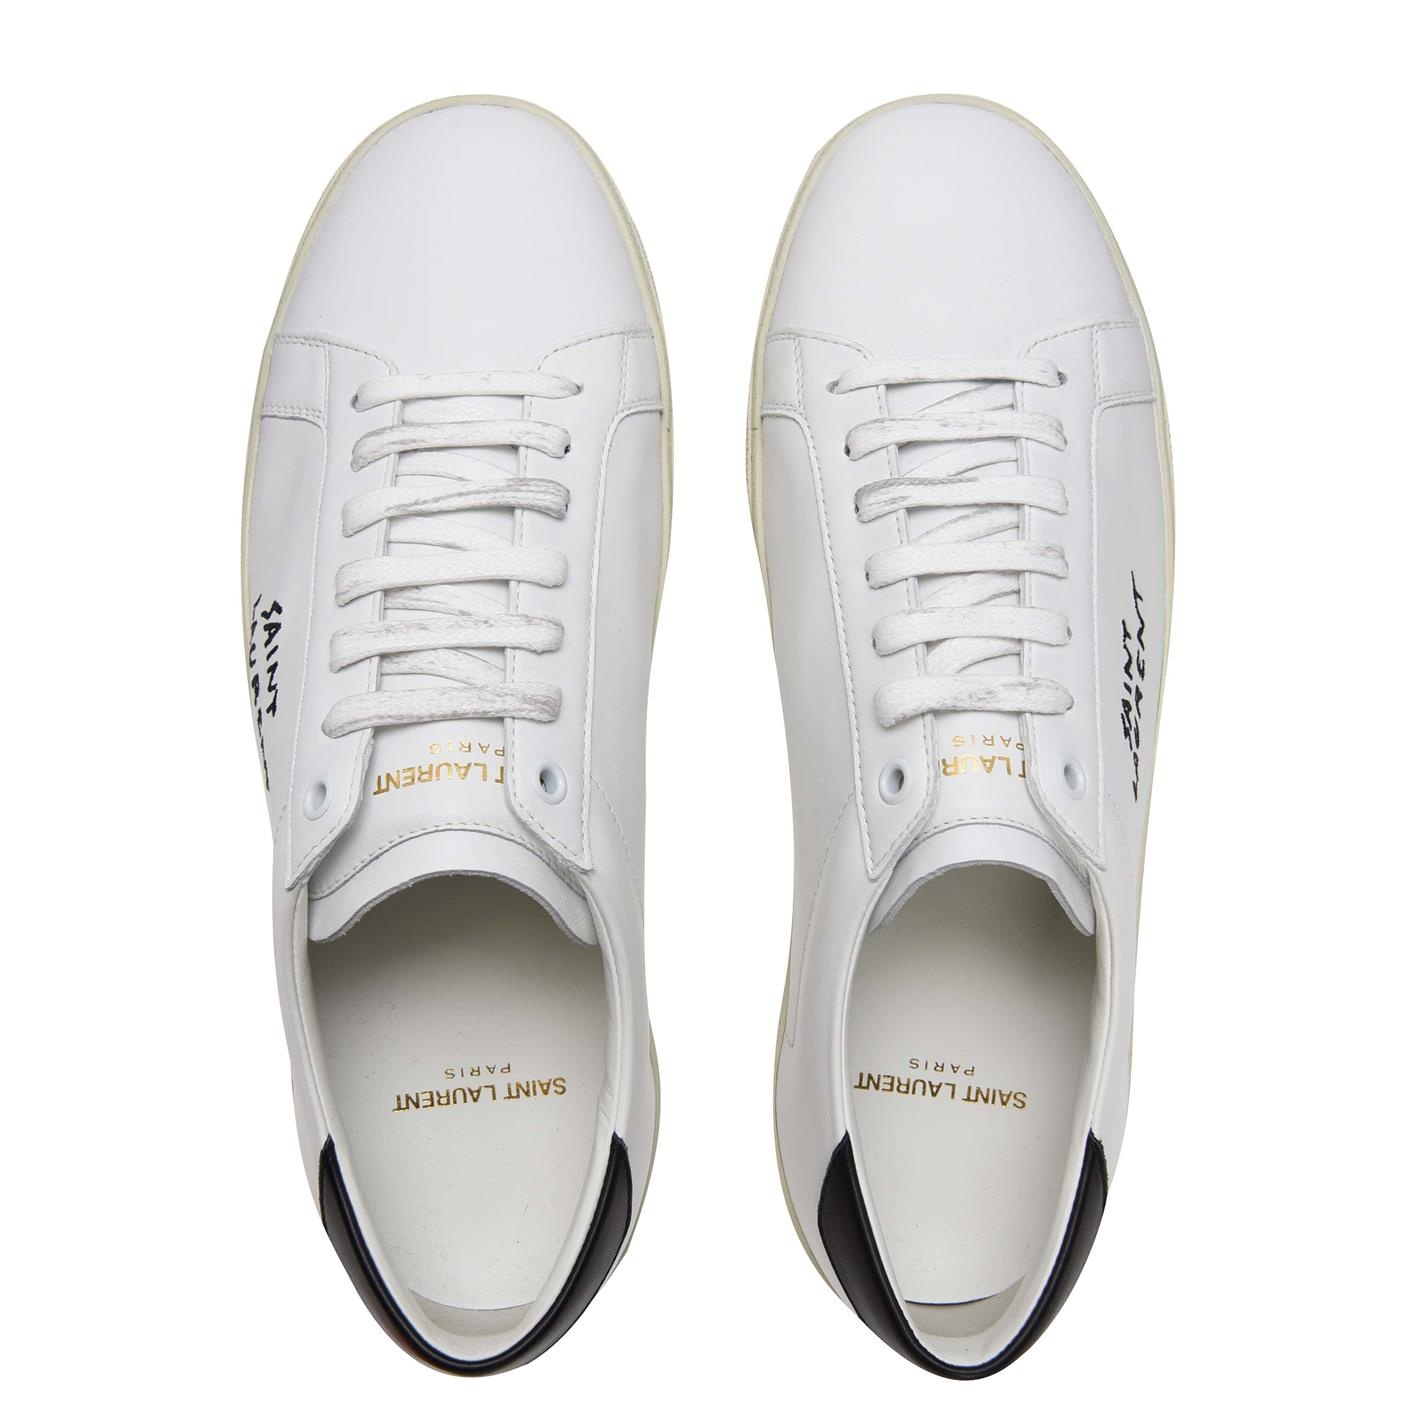 SL06 SIGNA LOW TRAINERS - 5